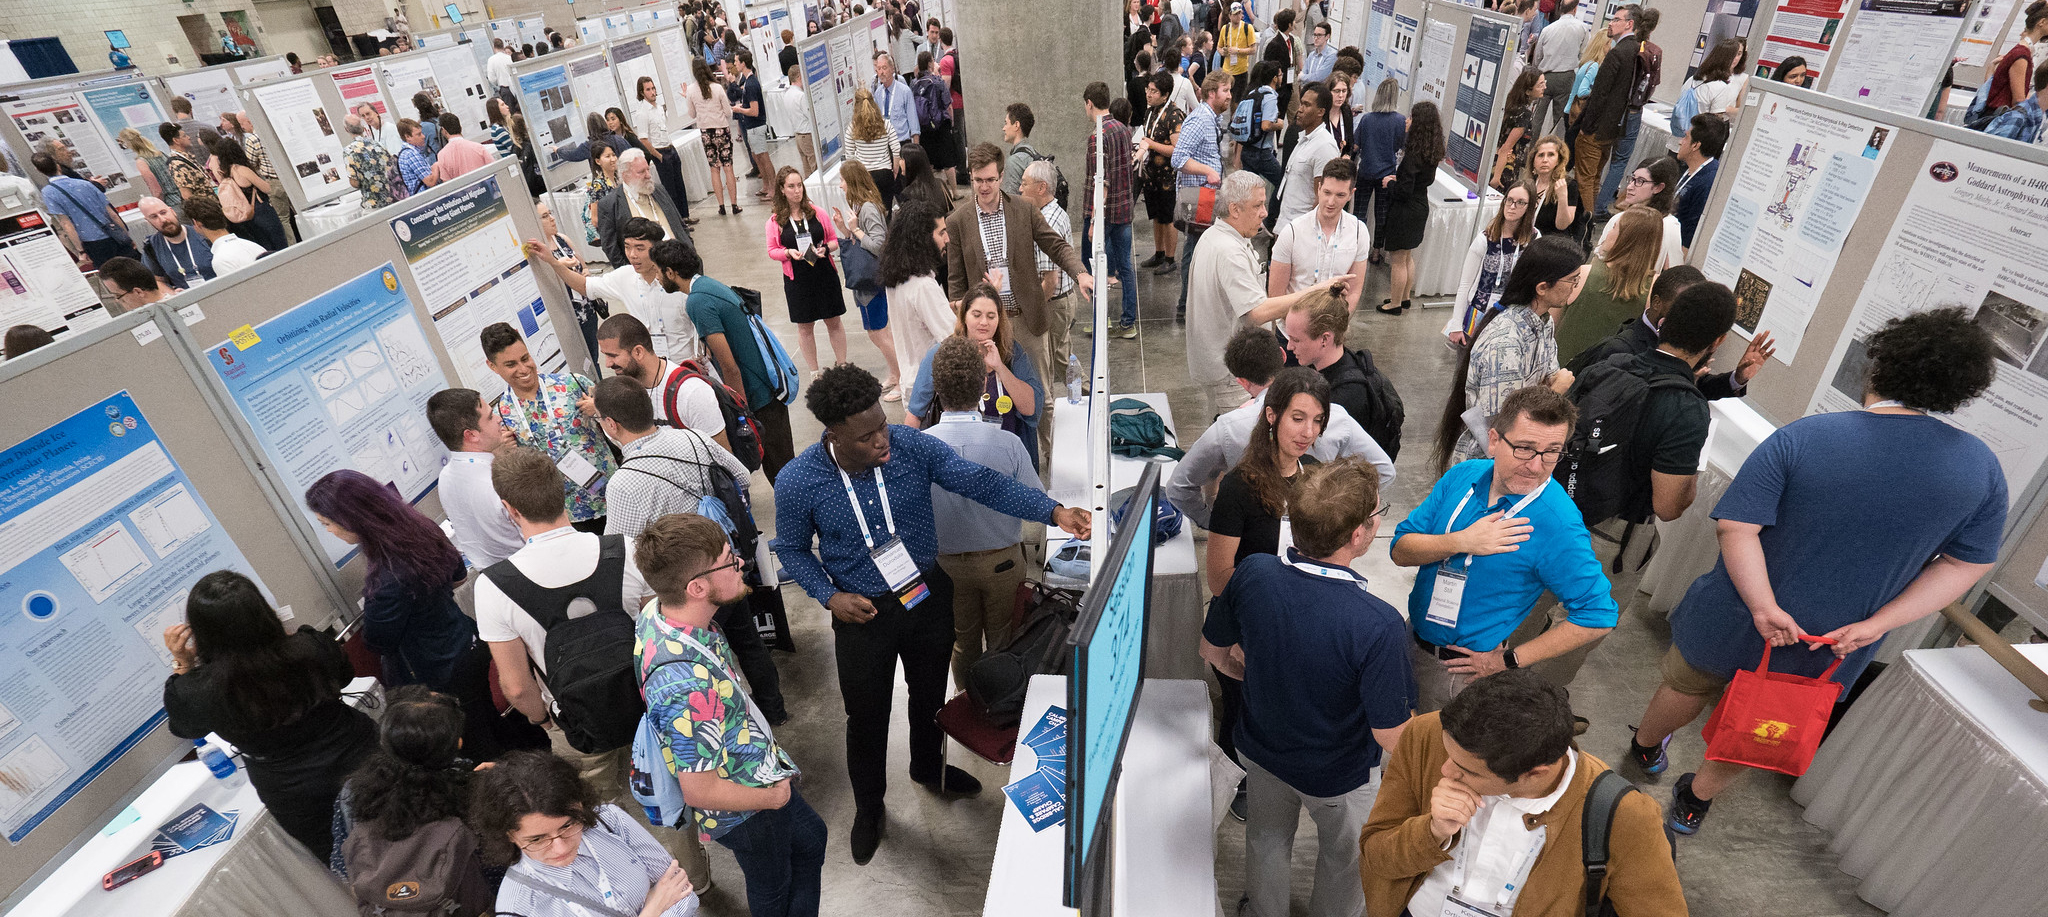 Poster sessions at AAS 235